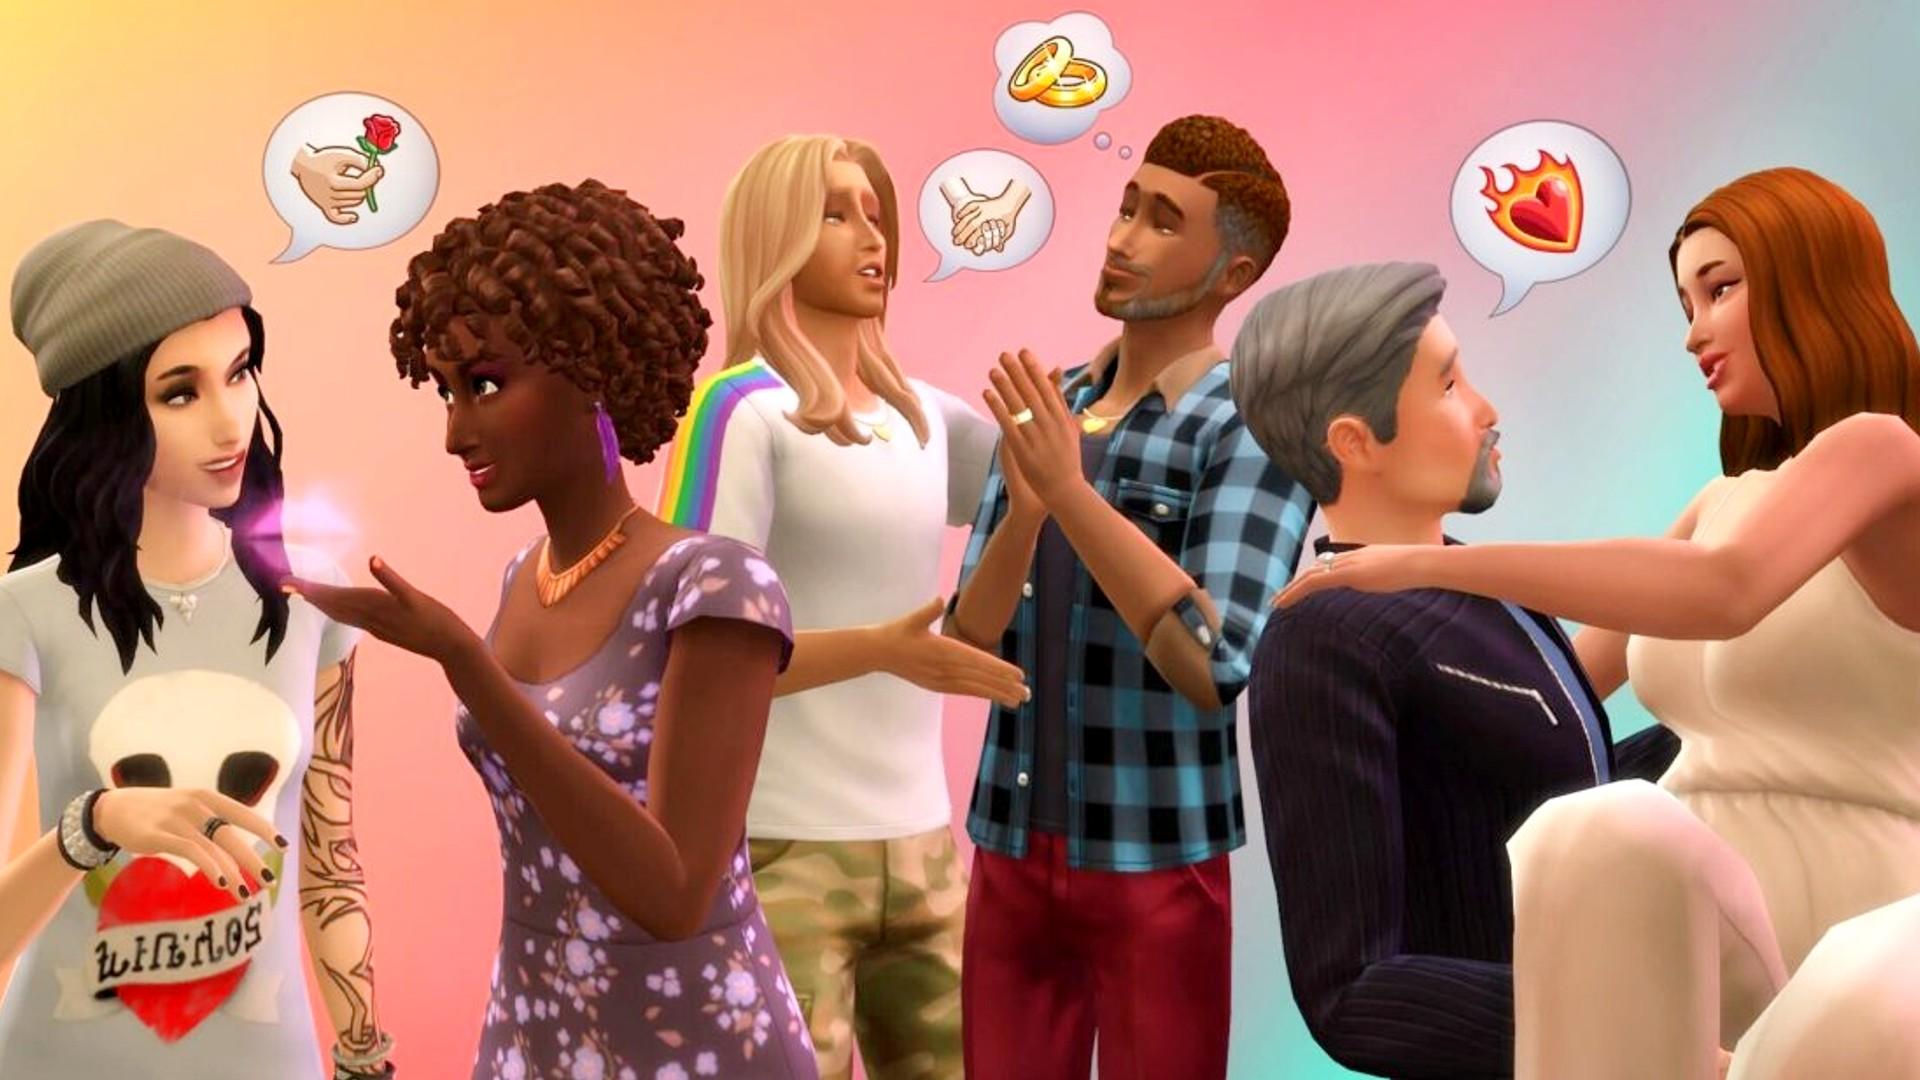 Sims 4 CC - Must Have Mods